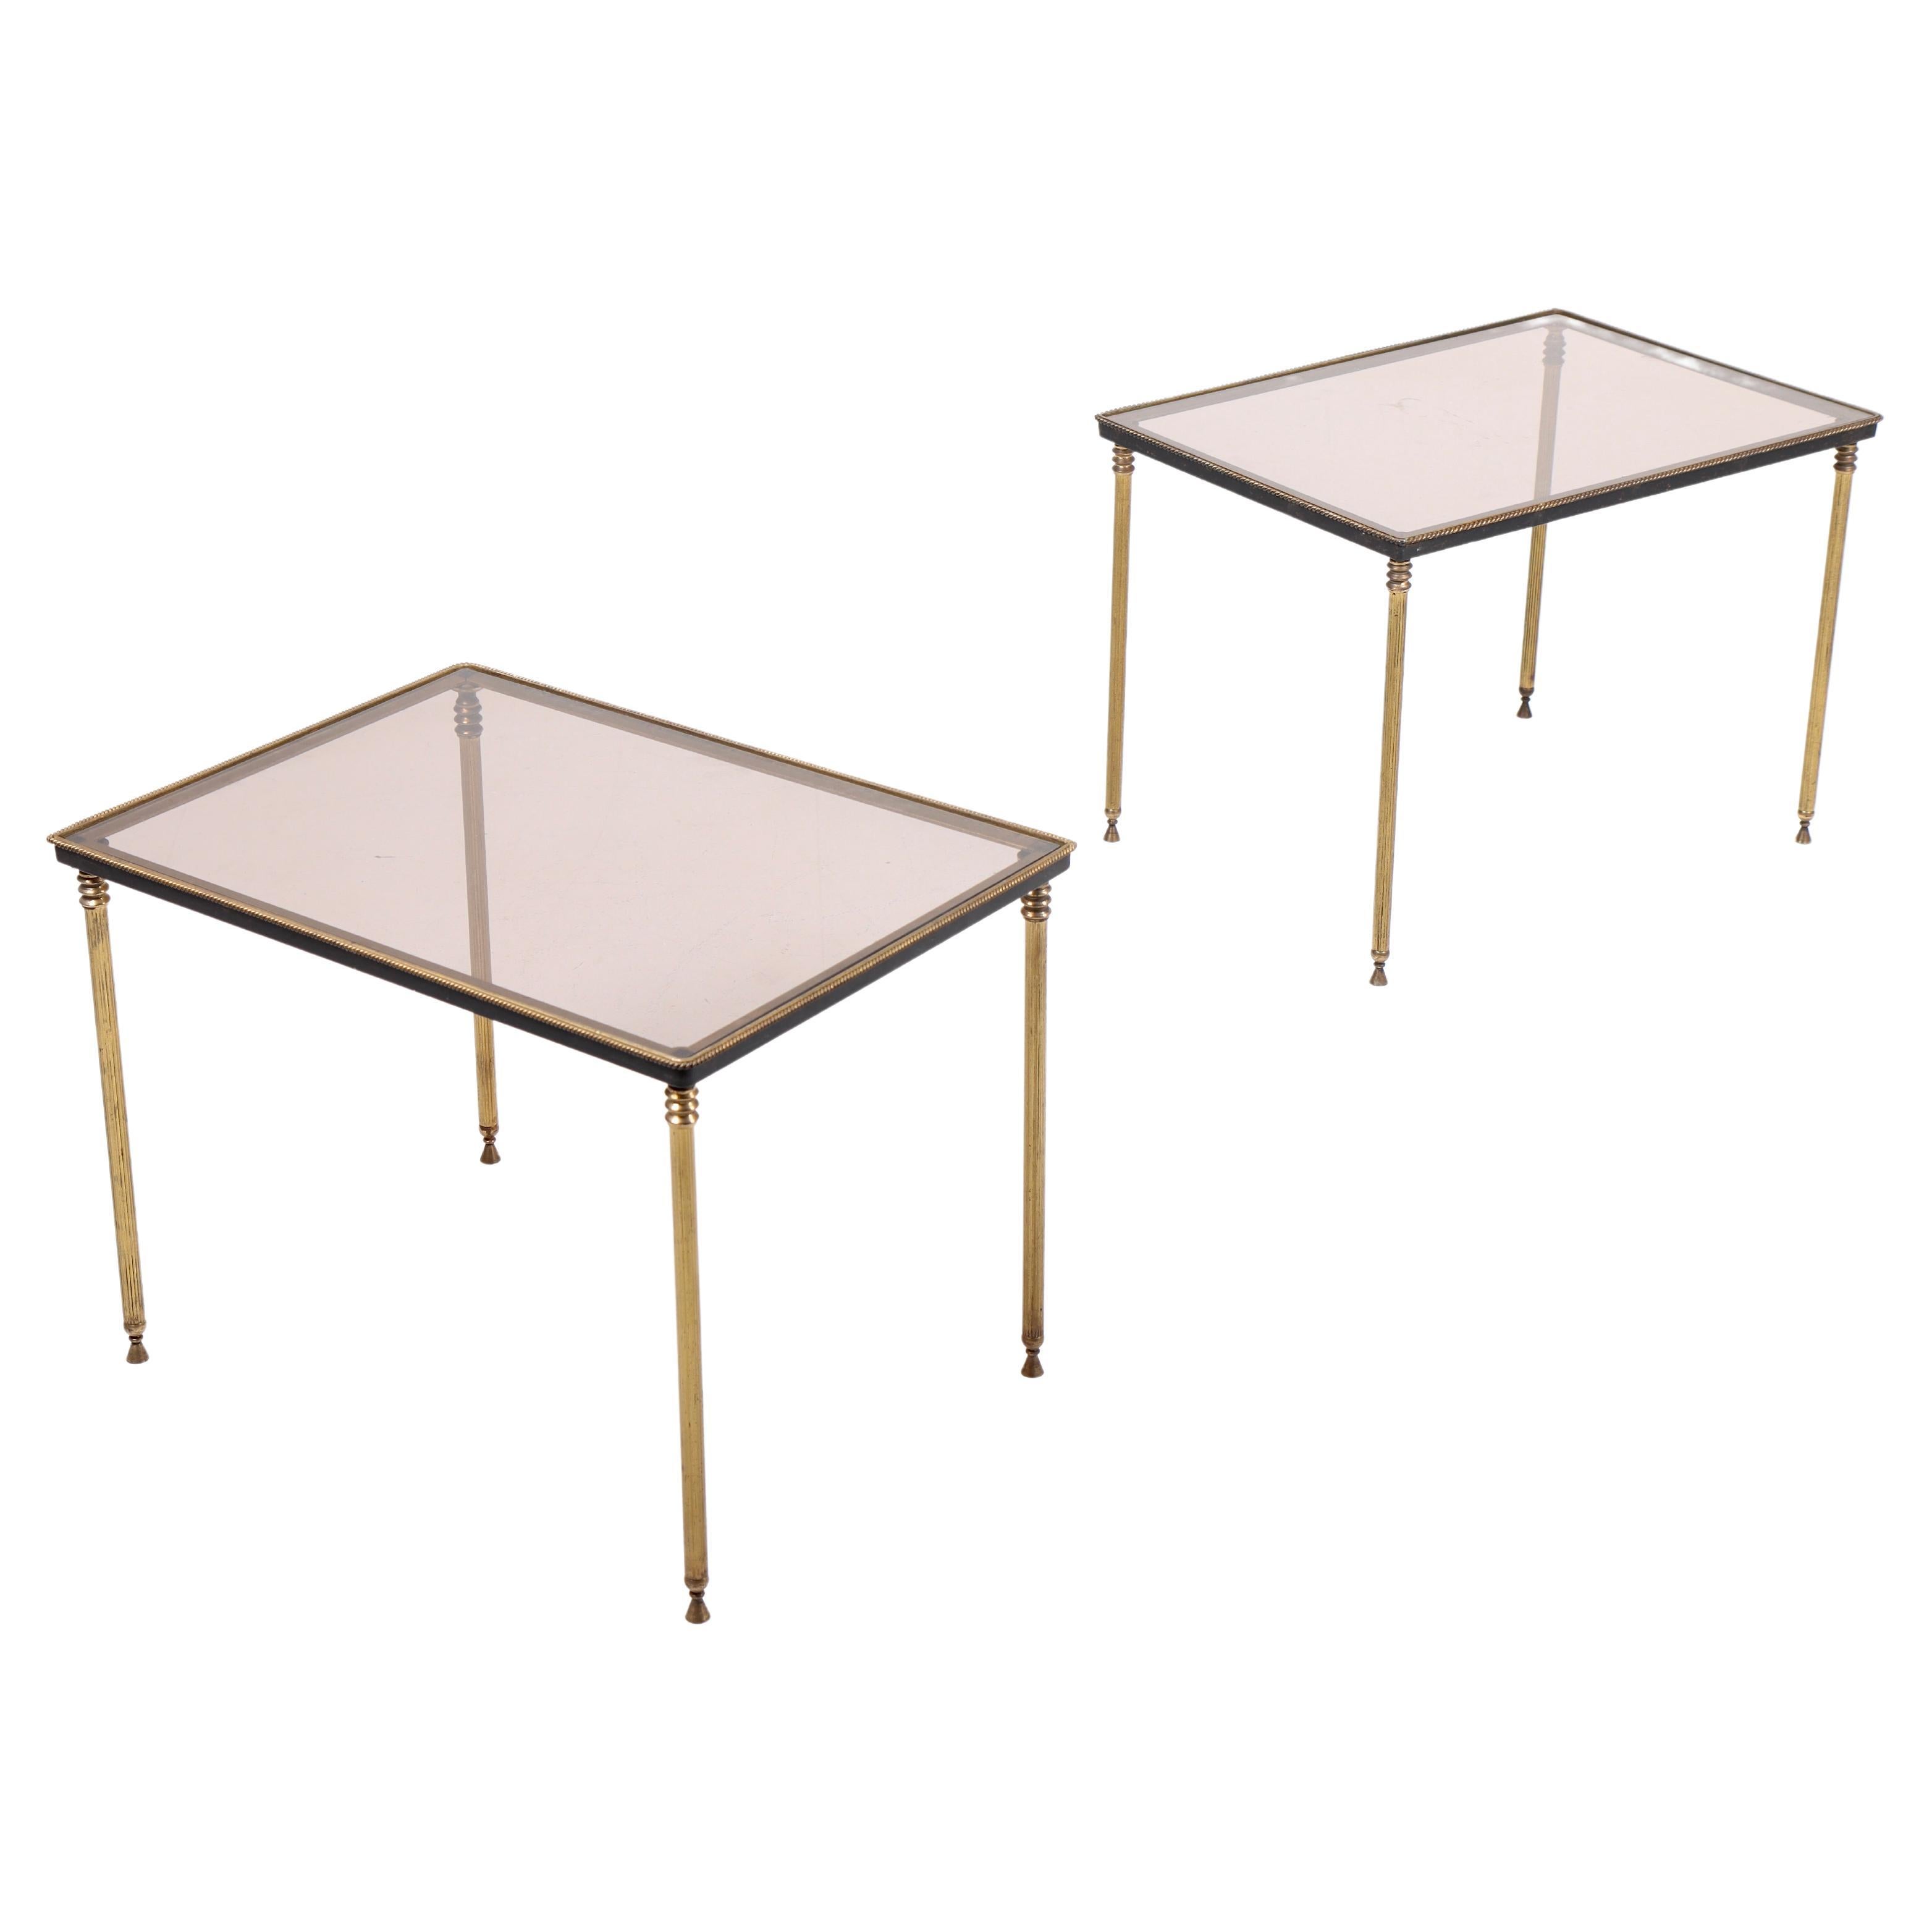 Pair of Mid-Century Side Tables in Brass and Glass, 1950s